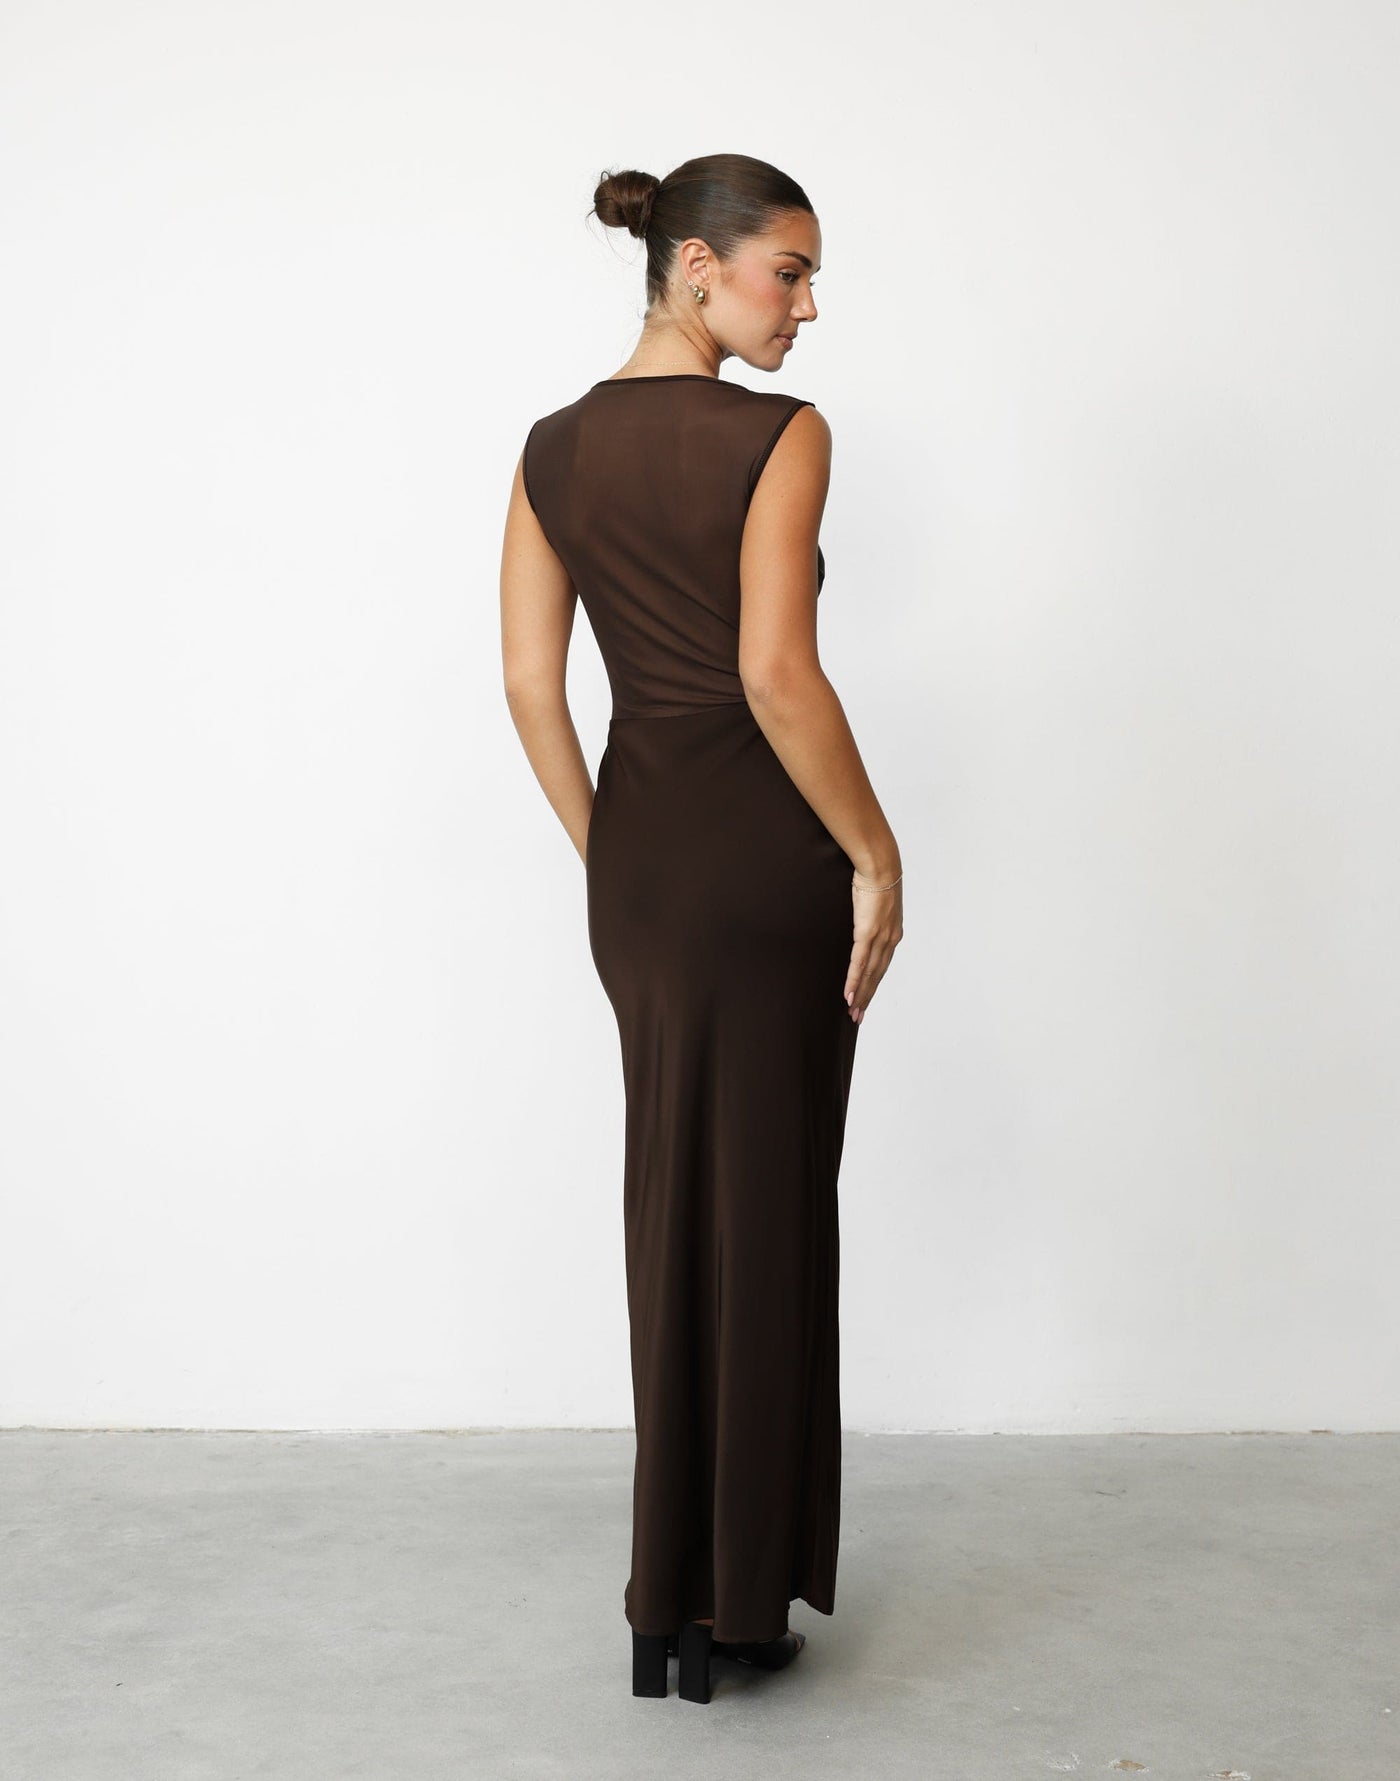 Lucetto Maxi Dress (Chocolate) | CHARCOAL Exclusive - Sheer Back Satin Maxi Dress - Women's Dress - Charcoal Clothing